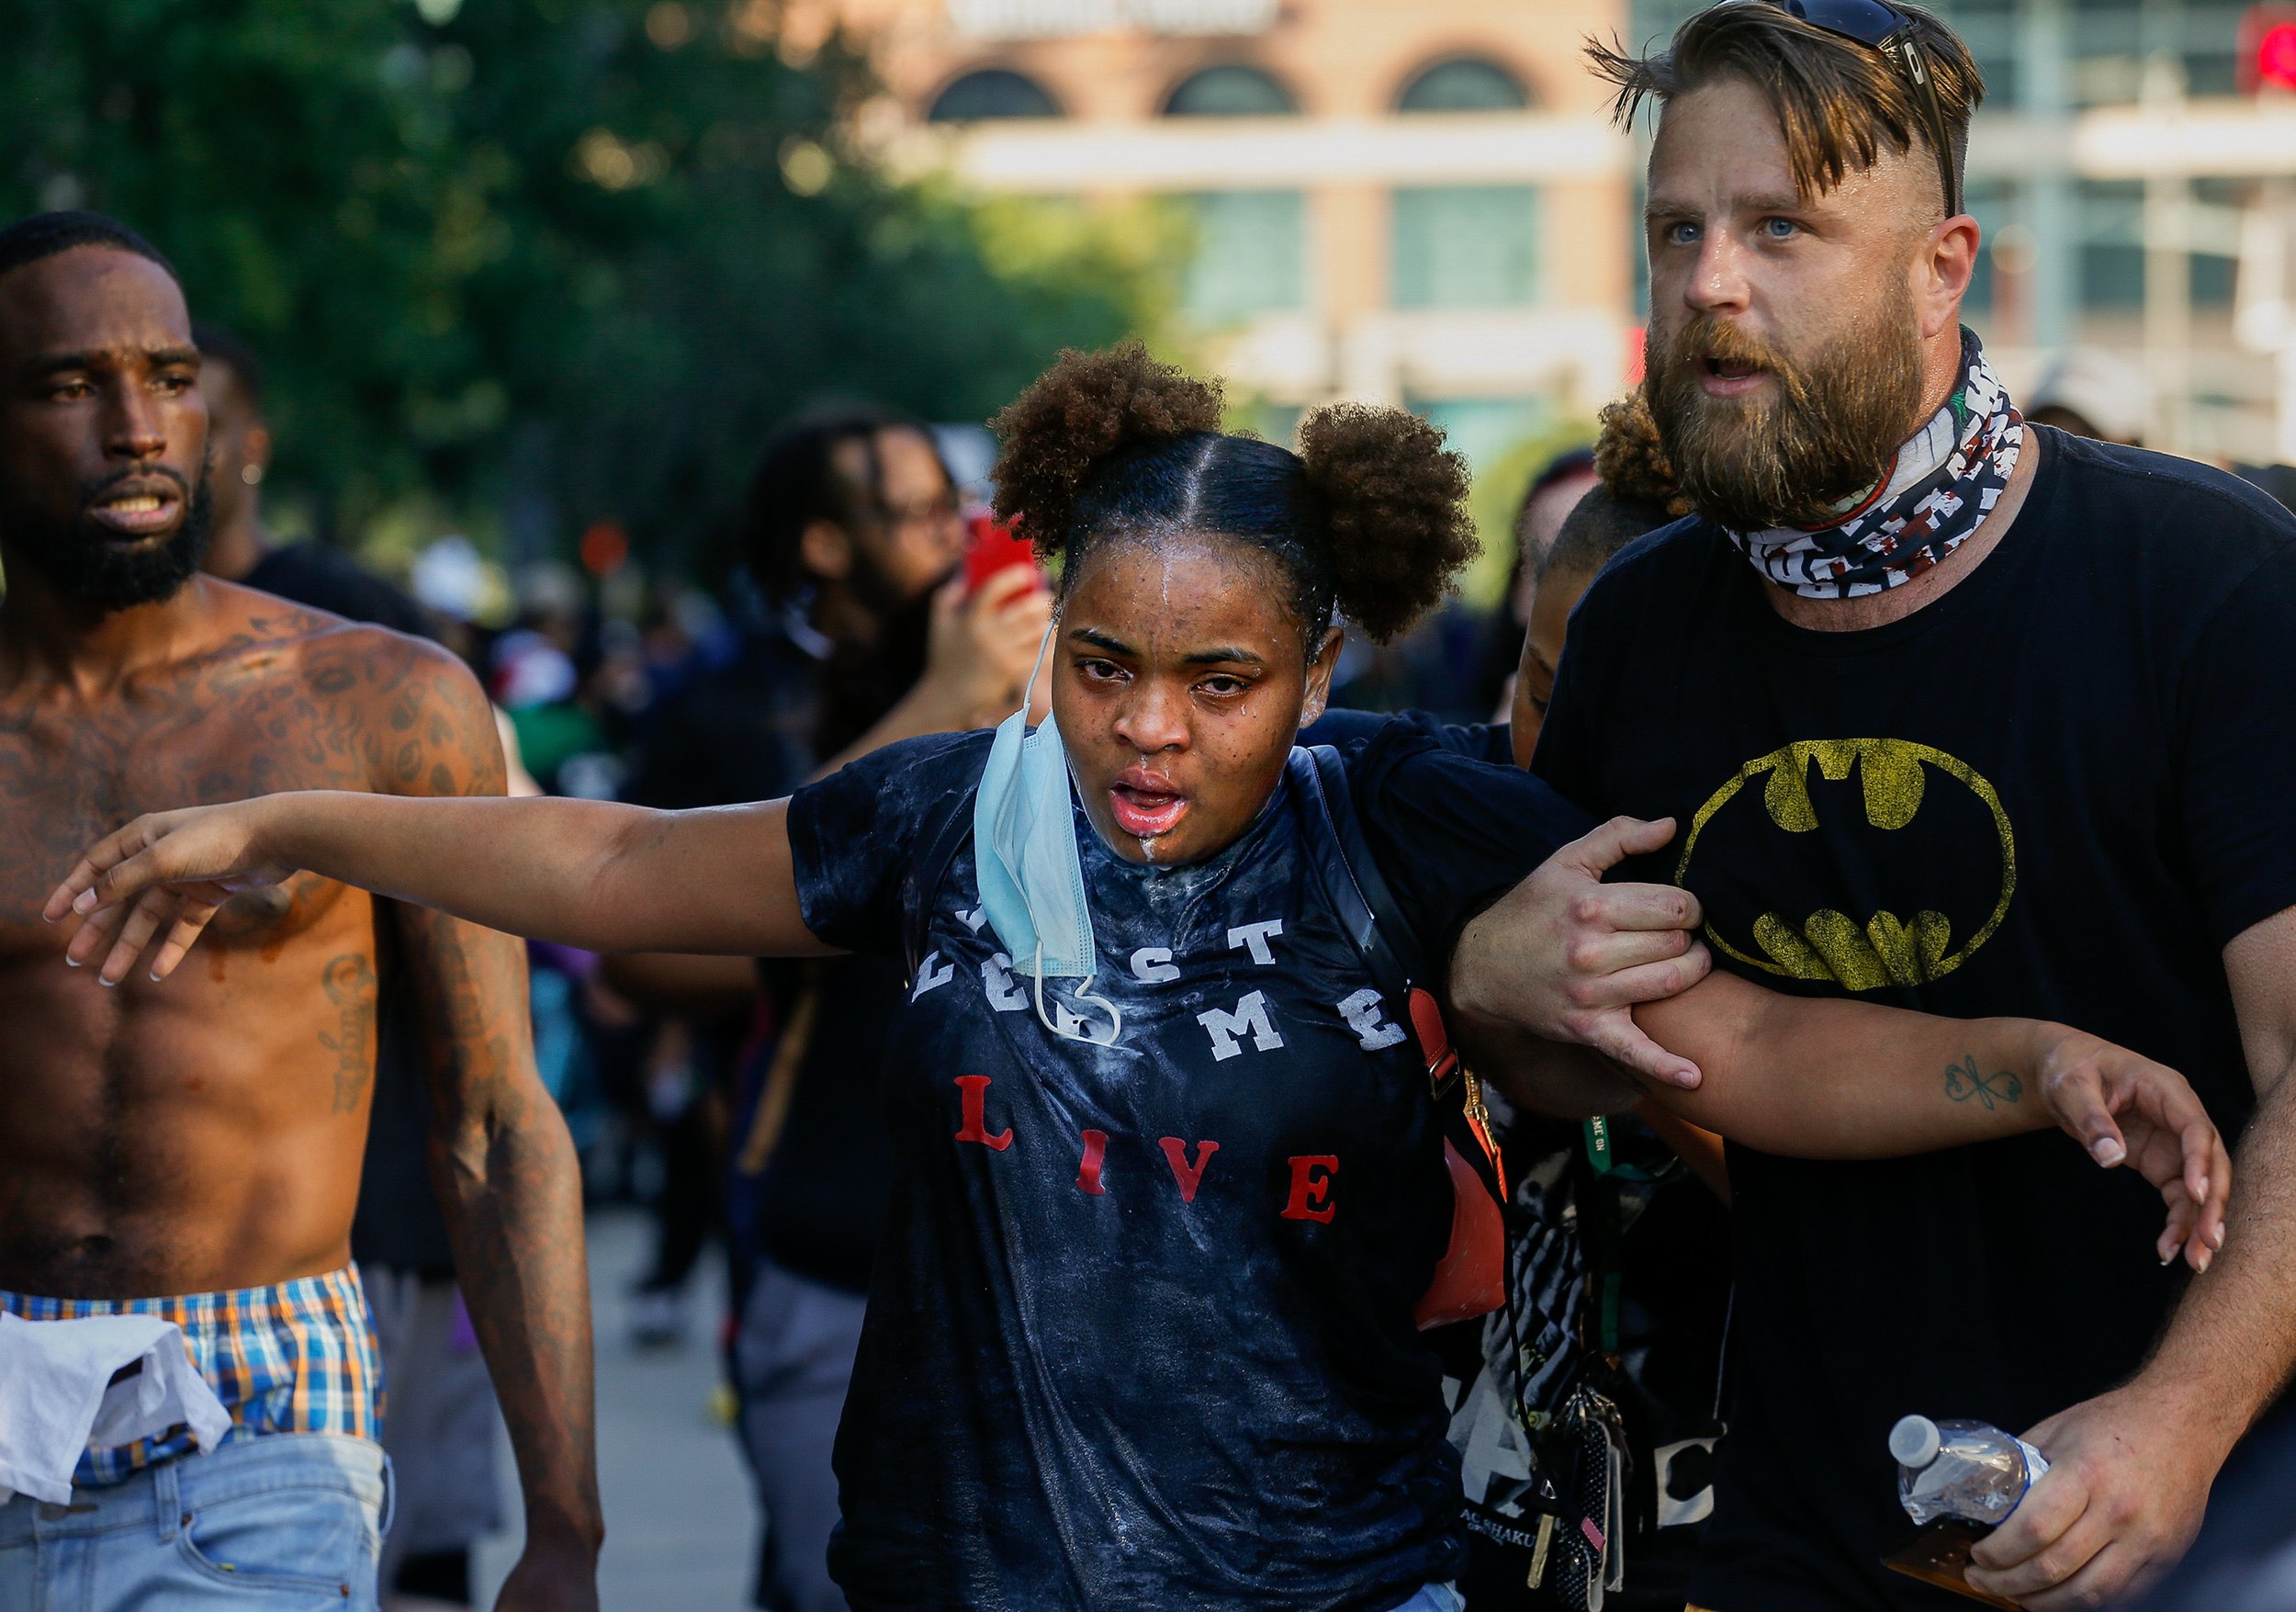  A woman is helped after she was pepper sprayed by Houston Police officers on Tuesday, June 2, 2020, in Houston, Texas. This was the fifth day of protests across the nation sparked by the death of former Houston resident George Floyd. He died while i